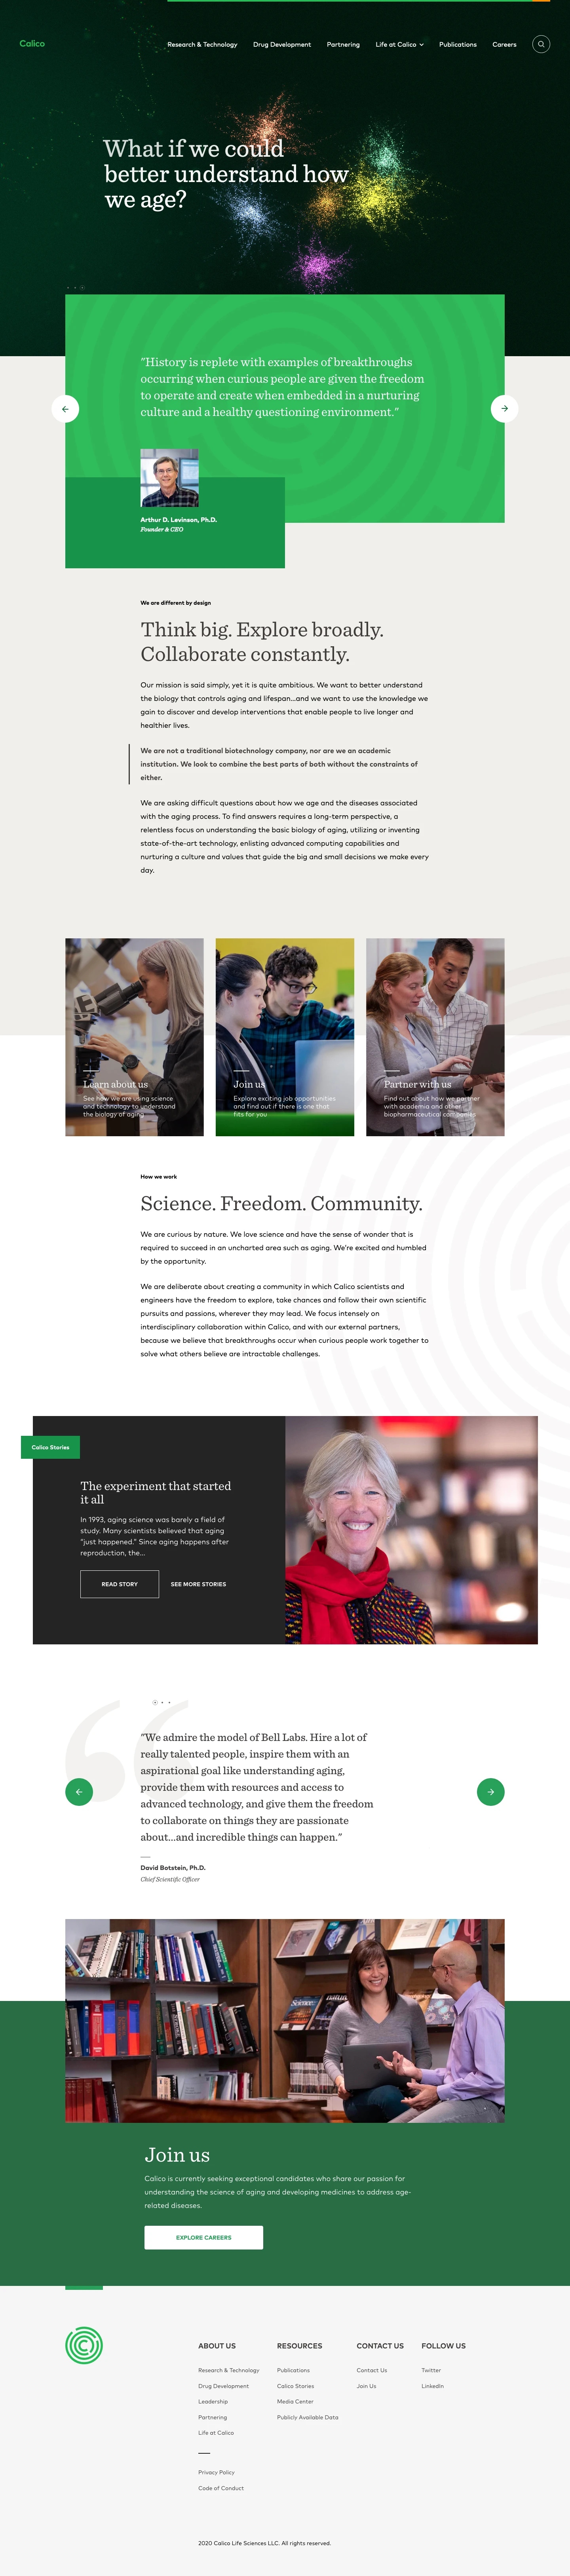 Calico Landing Page Example: Calico is a research and development company whose mission is to harness advanced technologies to increase our understanding of the biology that controls lifespan.